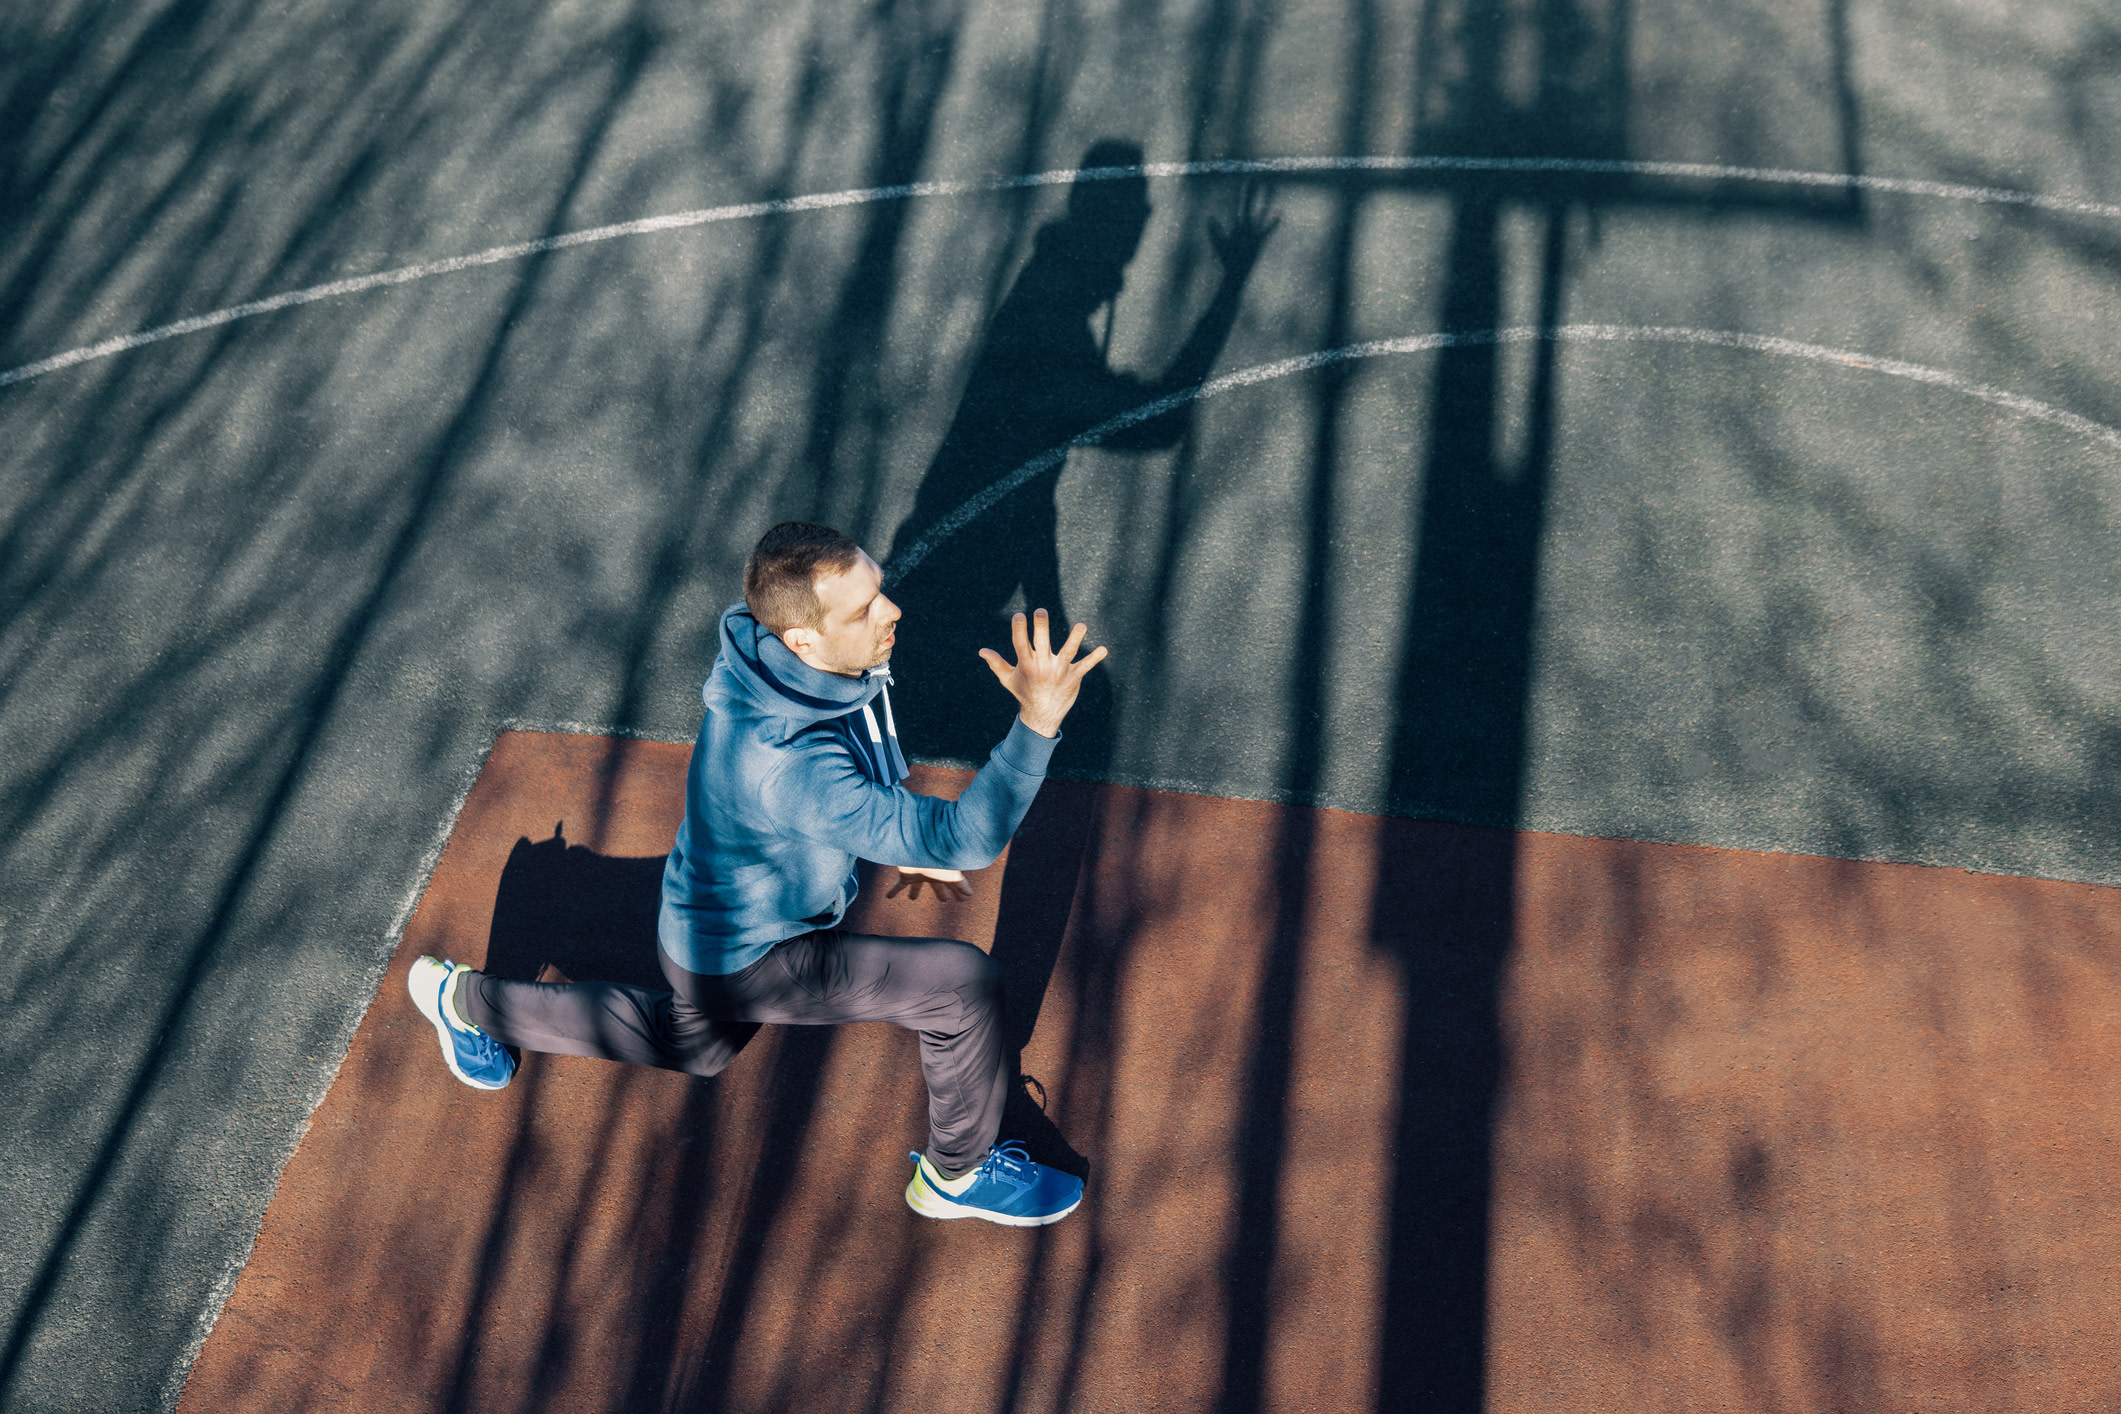 Man does a lunge exercise on a basketball court outdoors